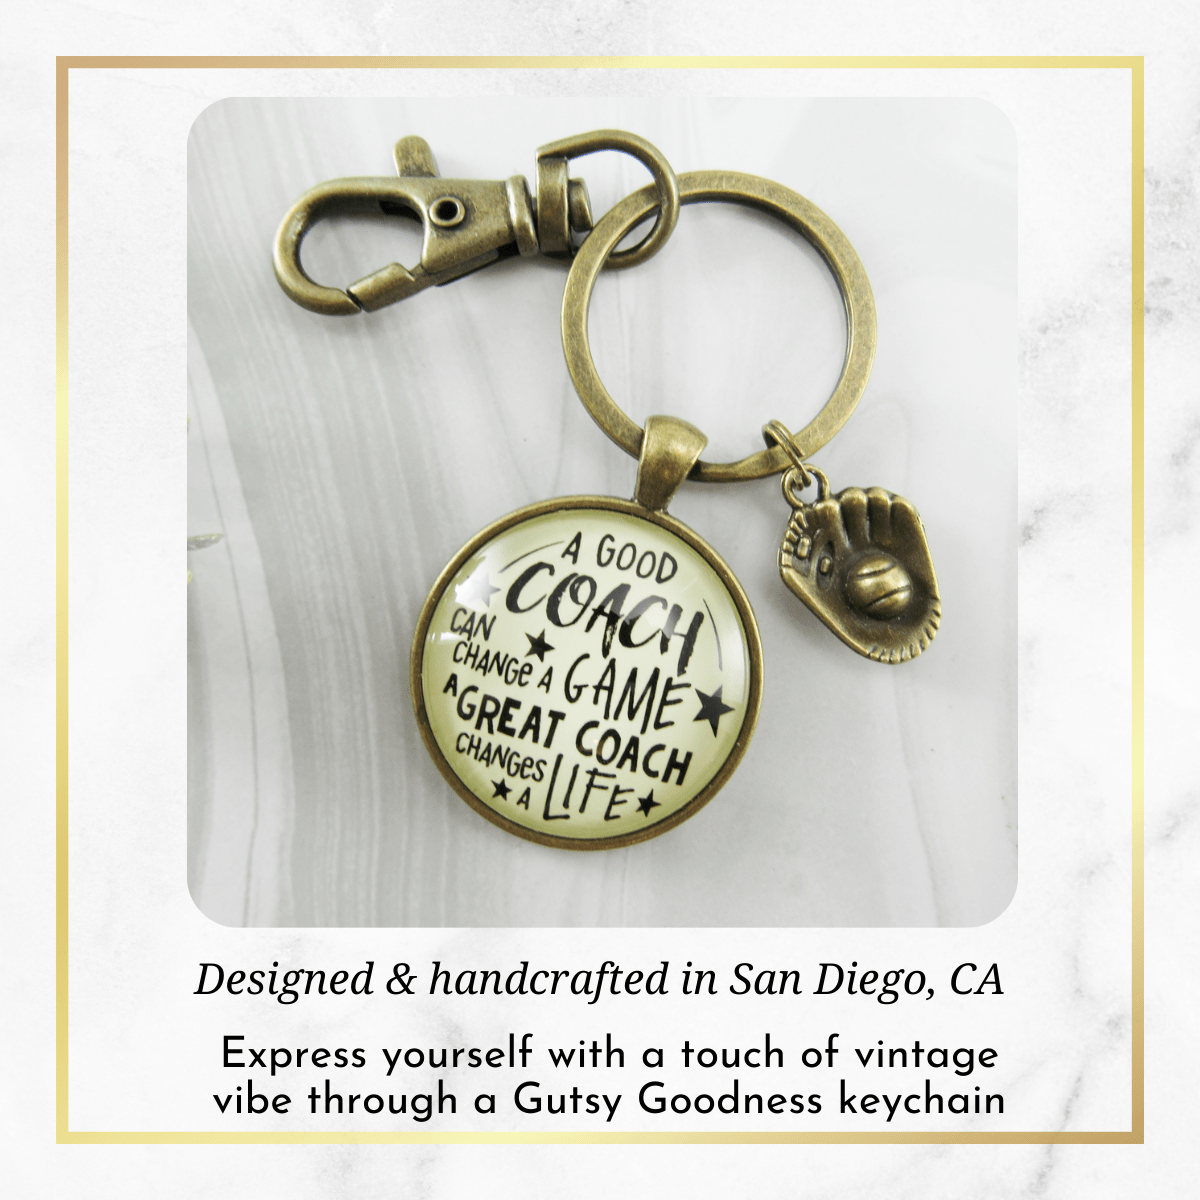 Baseball Coaching Sport Keychain Great Coach Changes Life Thank You Gift - Gutsy Goodness Handmade Jewelry Gifts